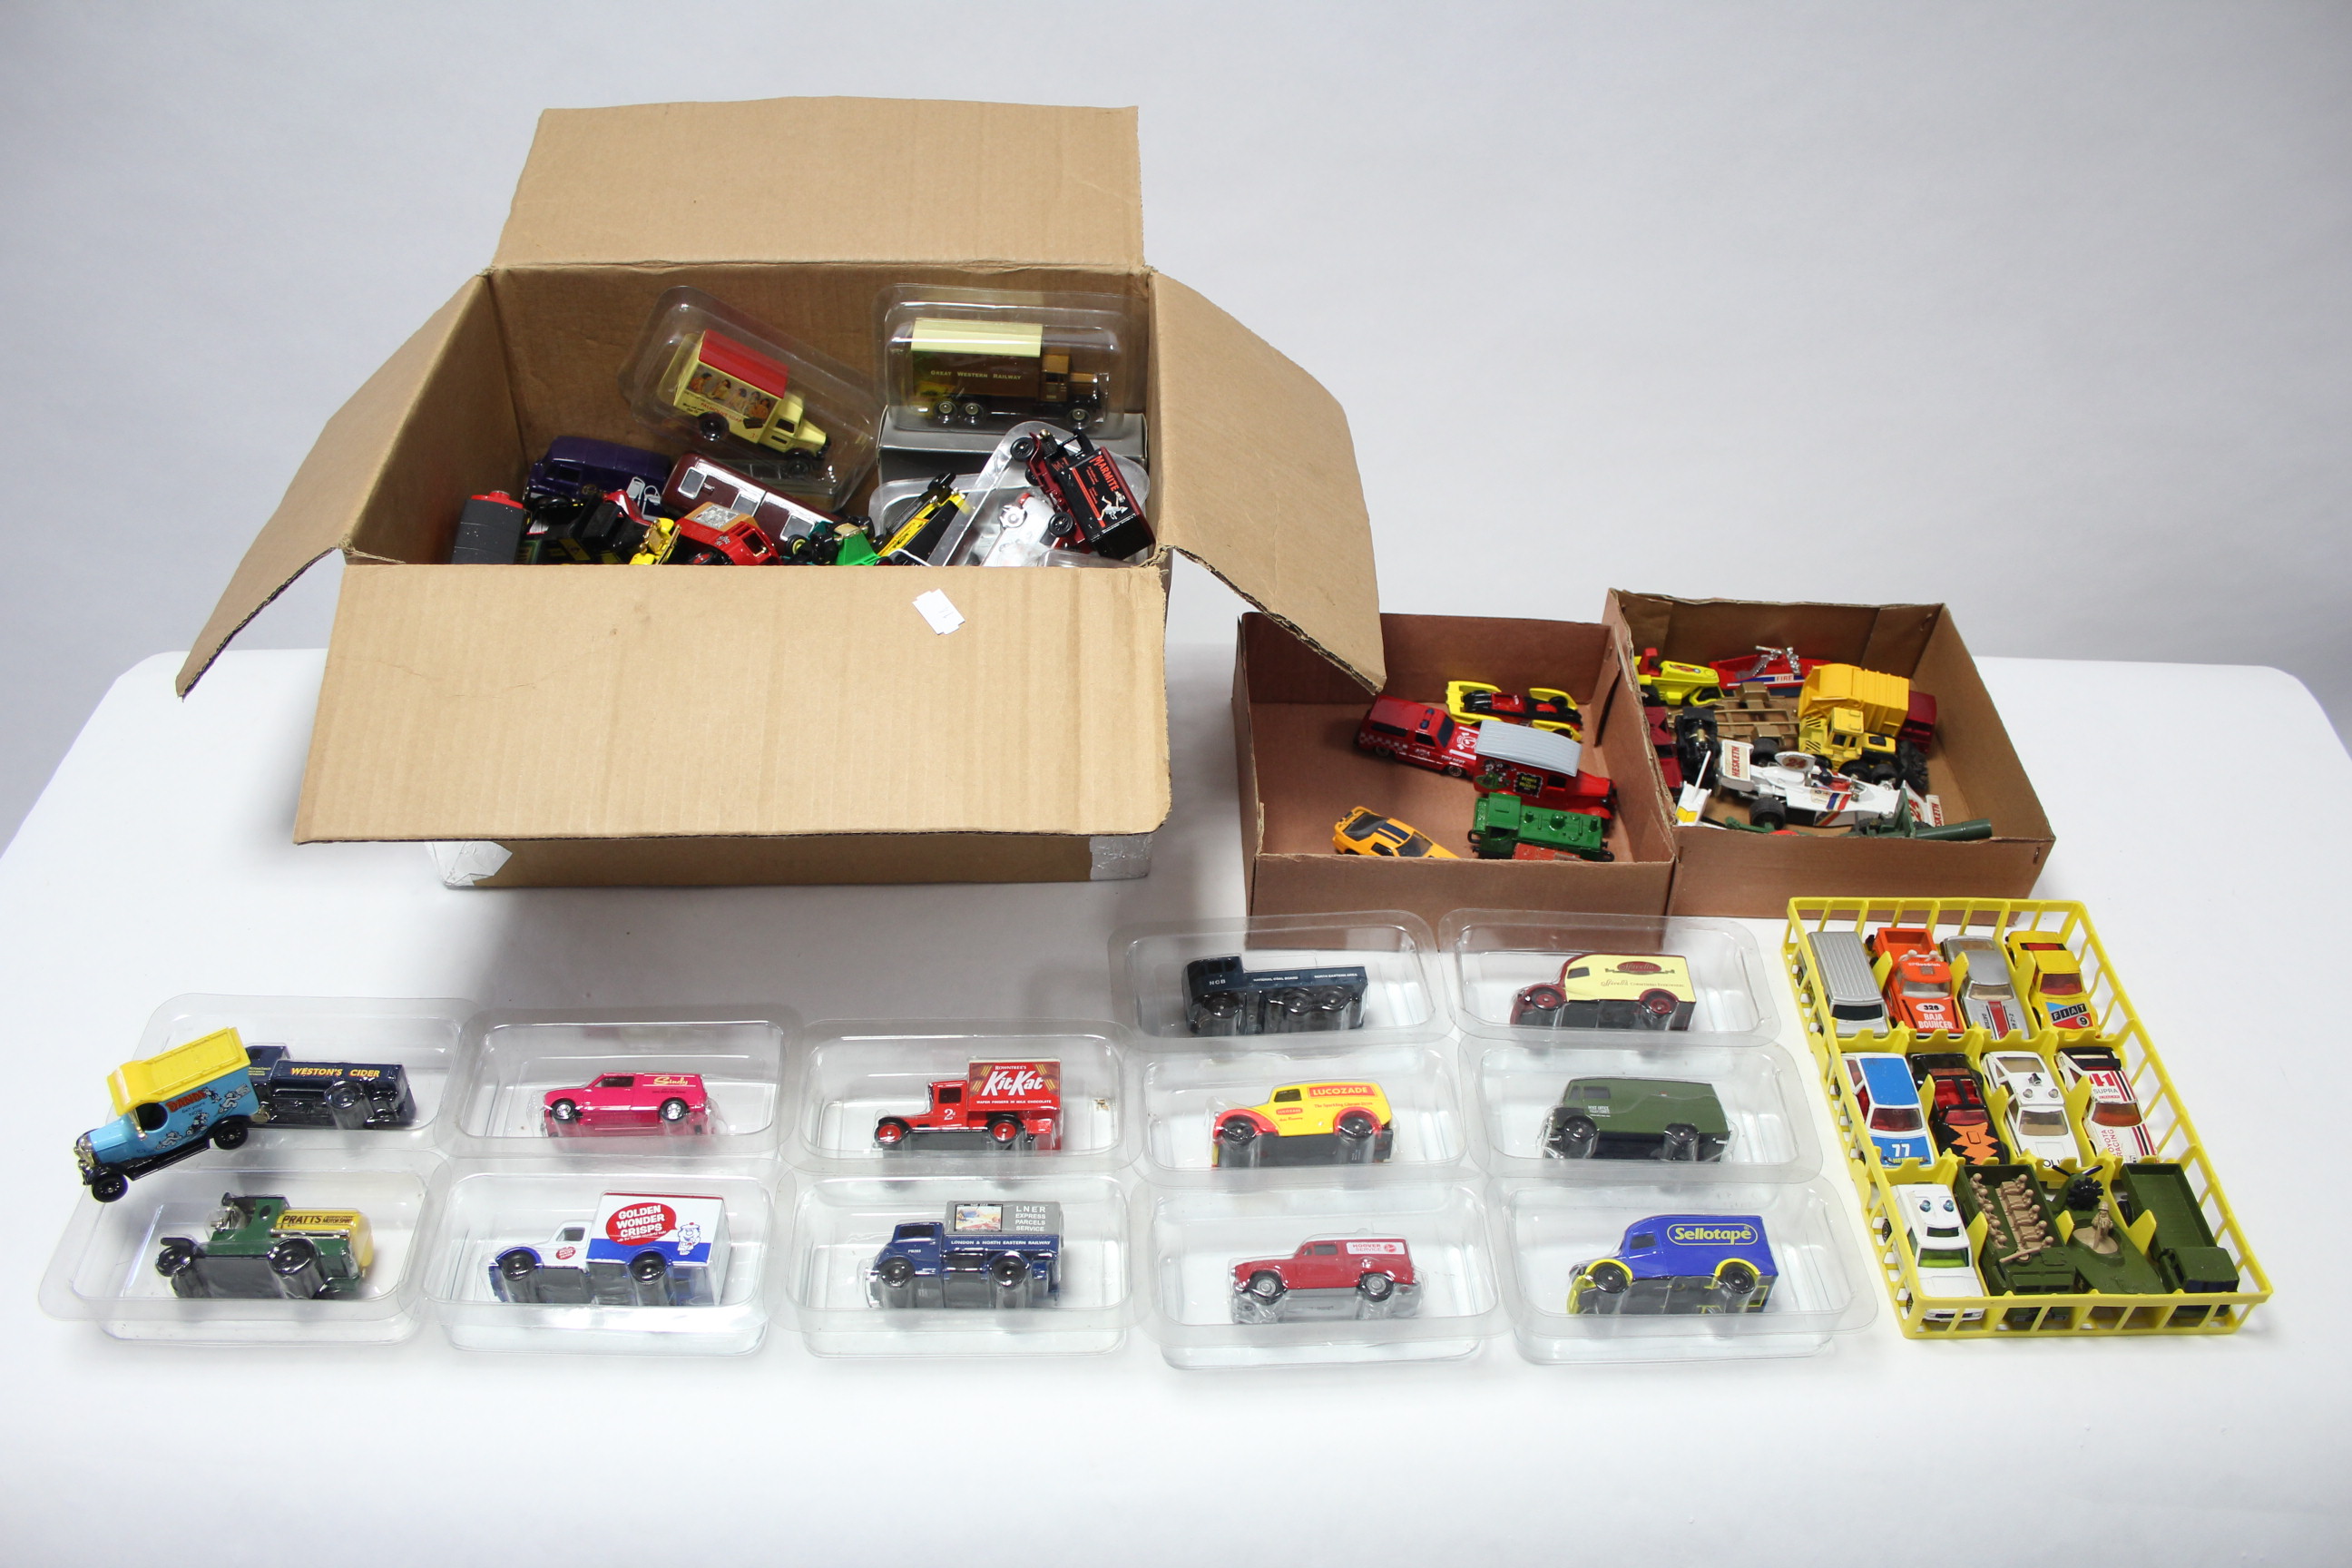 Approximately one hundred various scale models by Corgi, Lledo, & others, boxed & un-boxed.